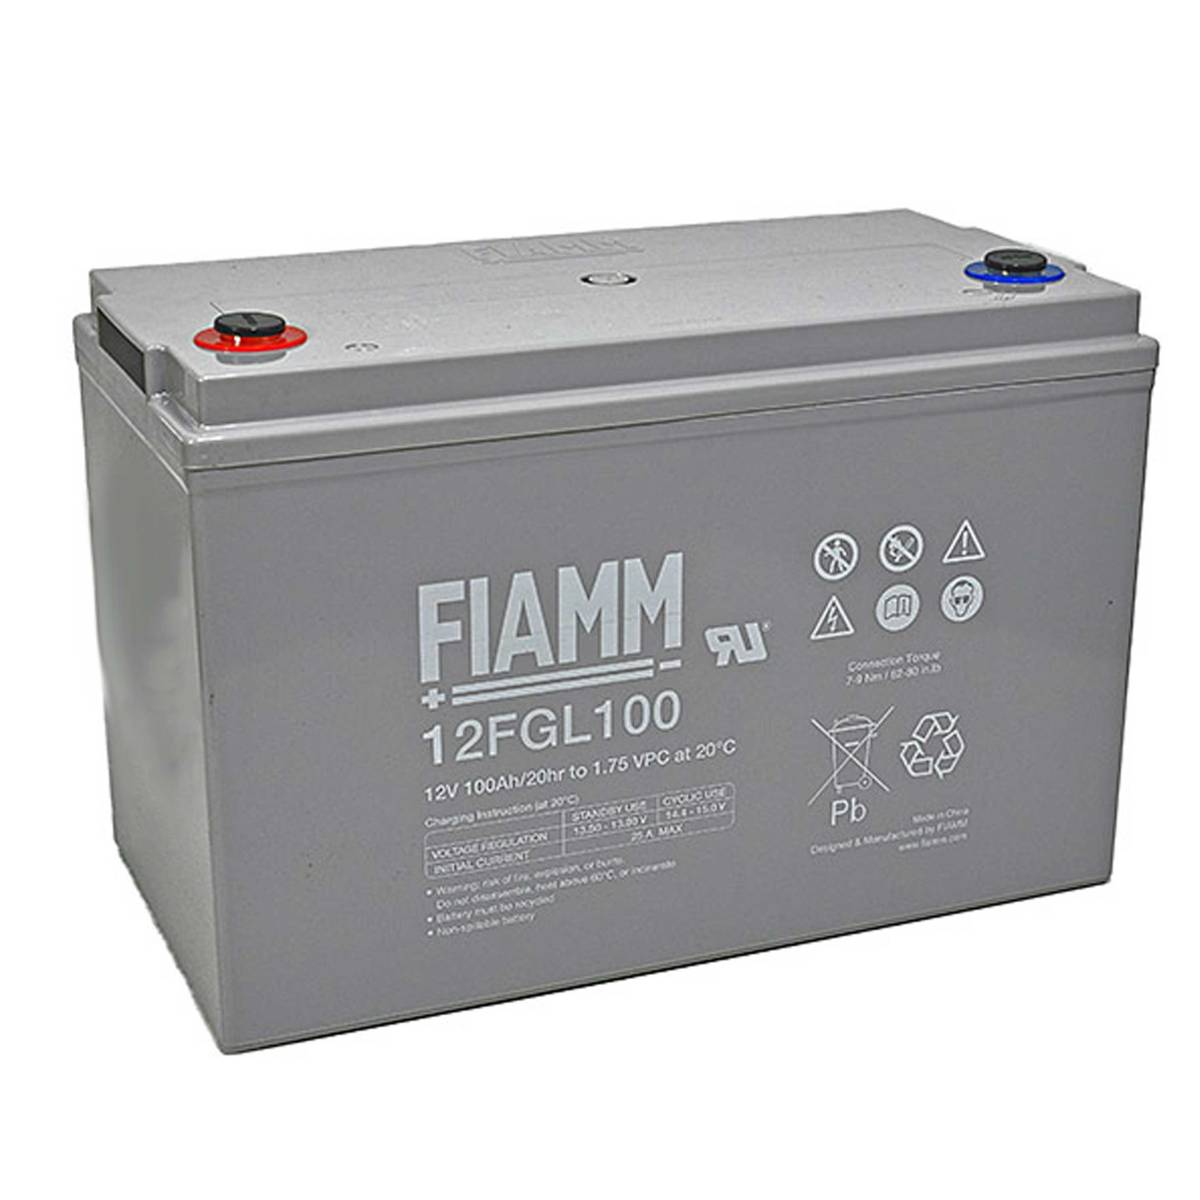 Fiamm 12FGL100 12V 100Ah lead-acid battery / AGM battery, Replacements for  UPS-Systems, UPS, Batteries by application